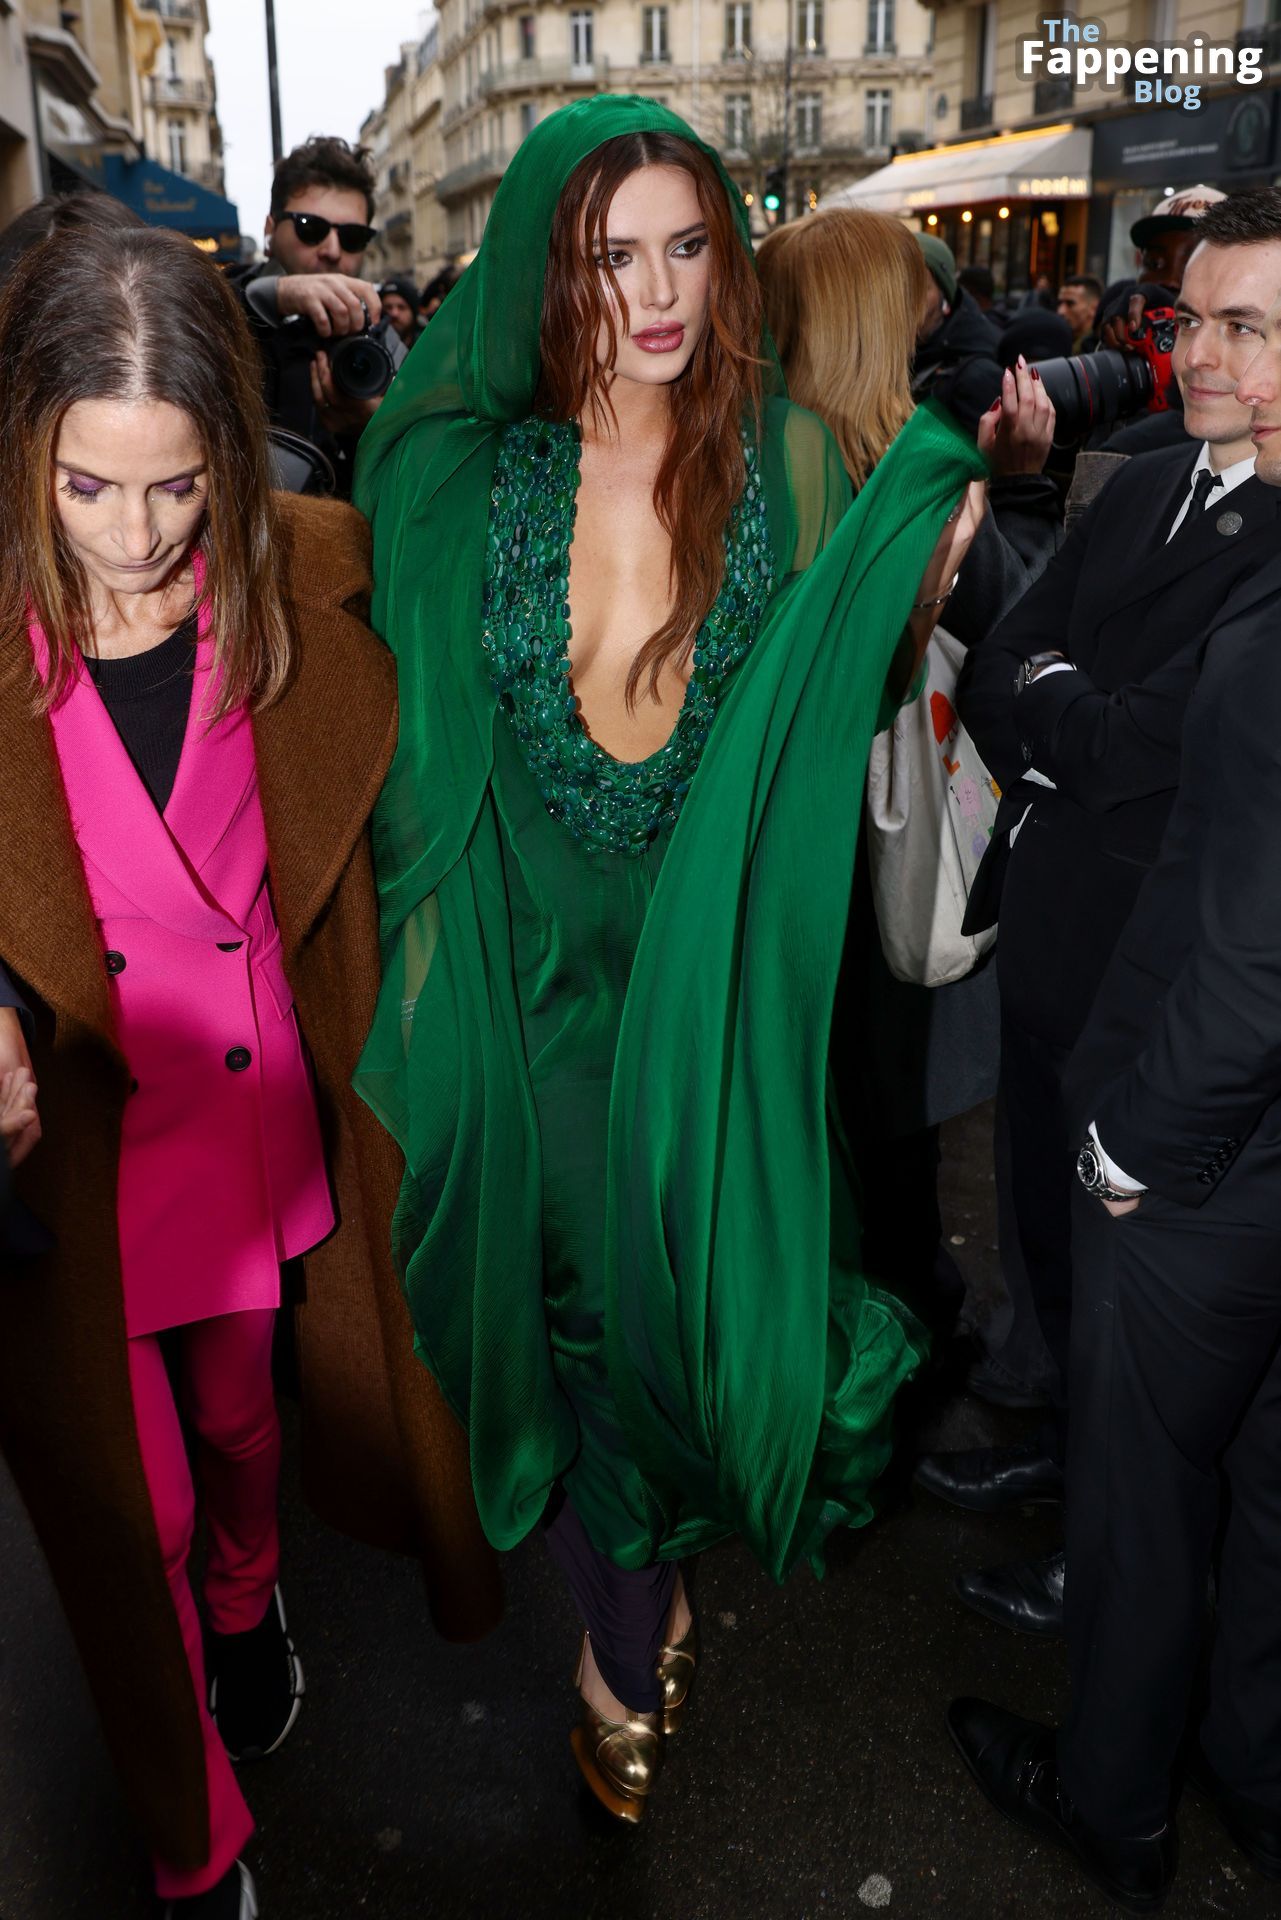 Bella Thorne Displays Her Sexy Tits at the he Stephane Rolland Haute Couture Show in Paris (38 Photos)